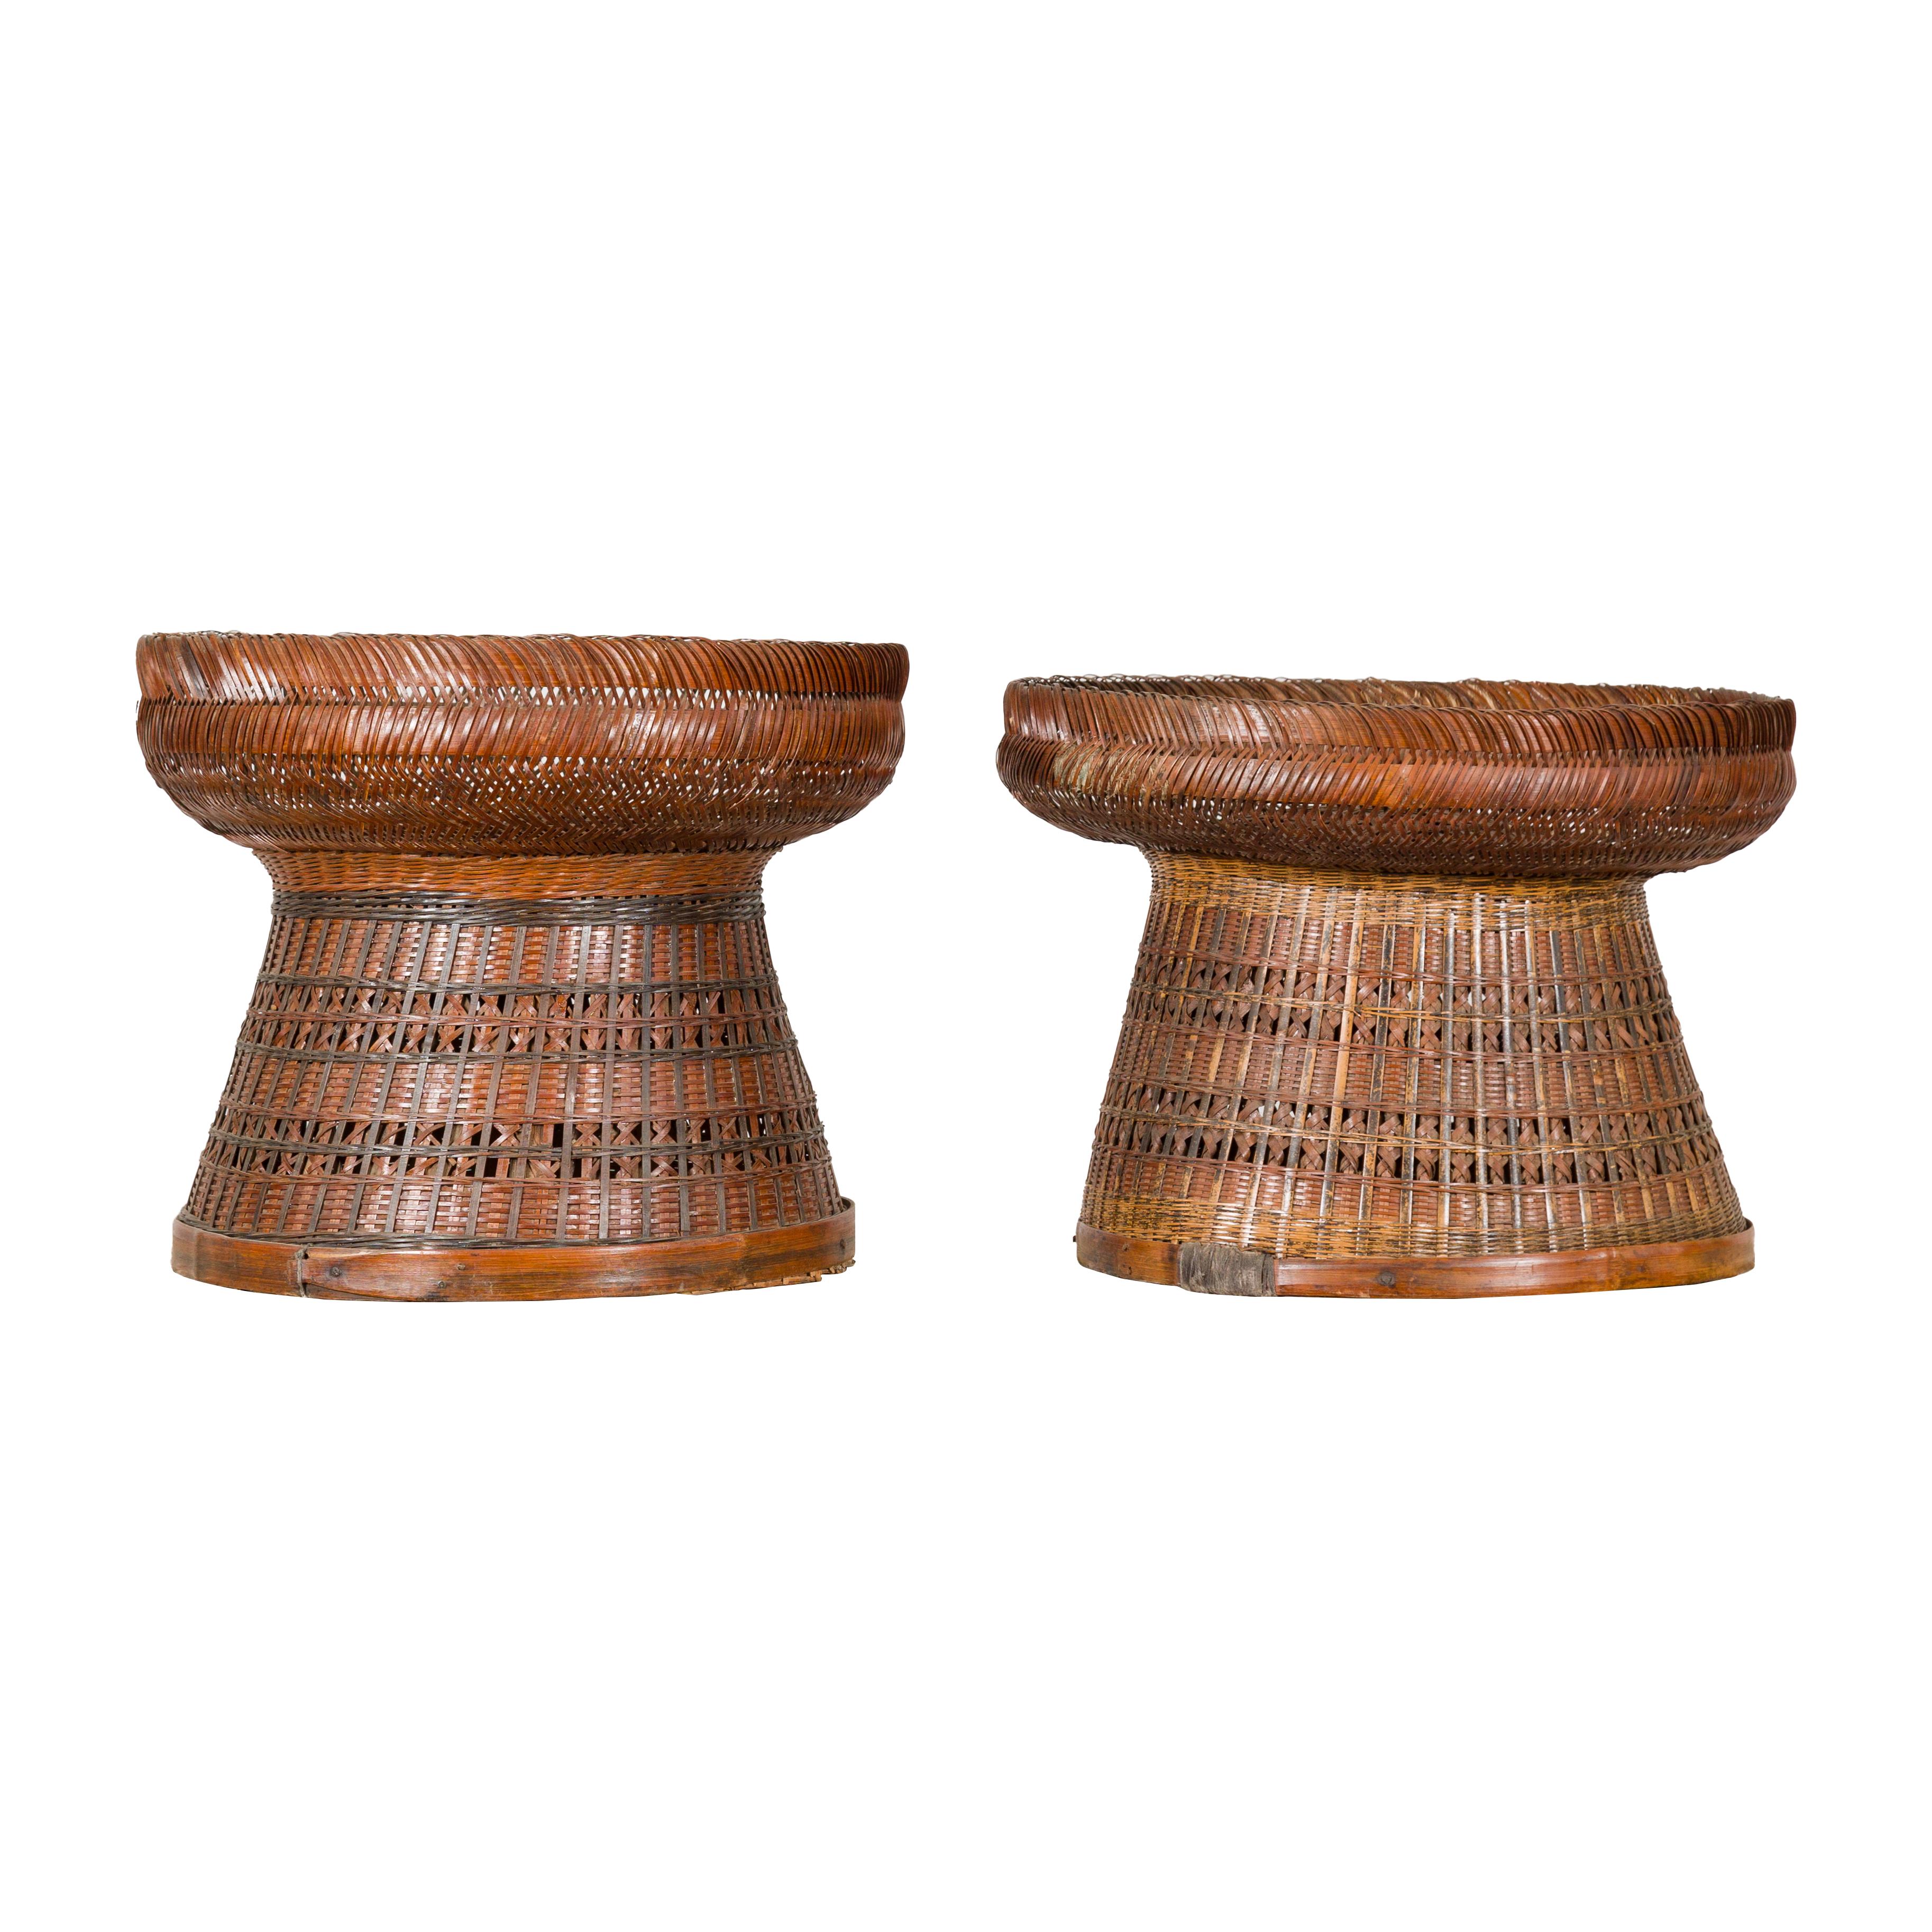 Two antique Chinese hand-woven rattan baskets with circular tops and tapering bases. These two antique Chinese hand-woven rattan baskets, with their circular tops and gently tapering bases, offer a glimpse into the timeless artistry of traditional